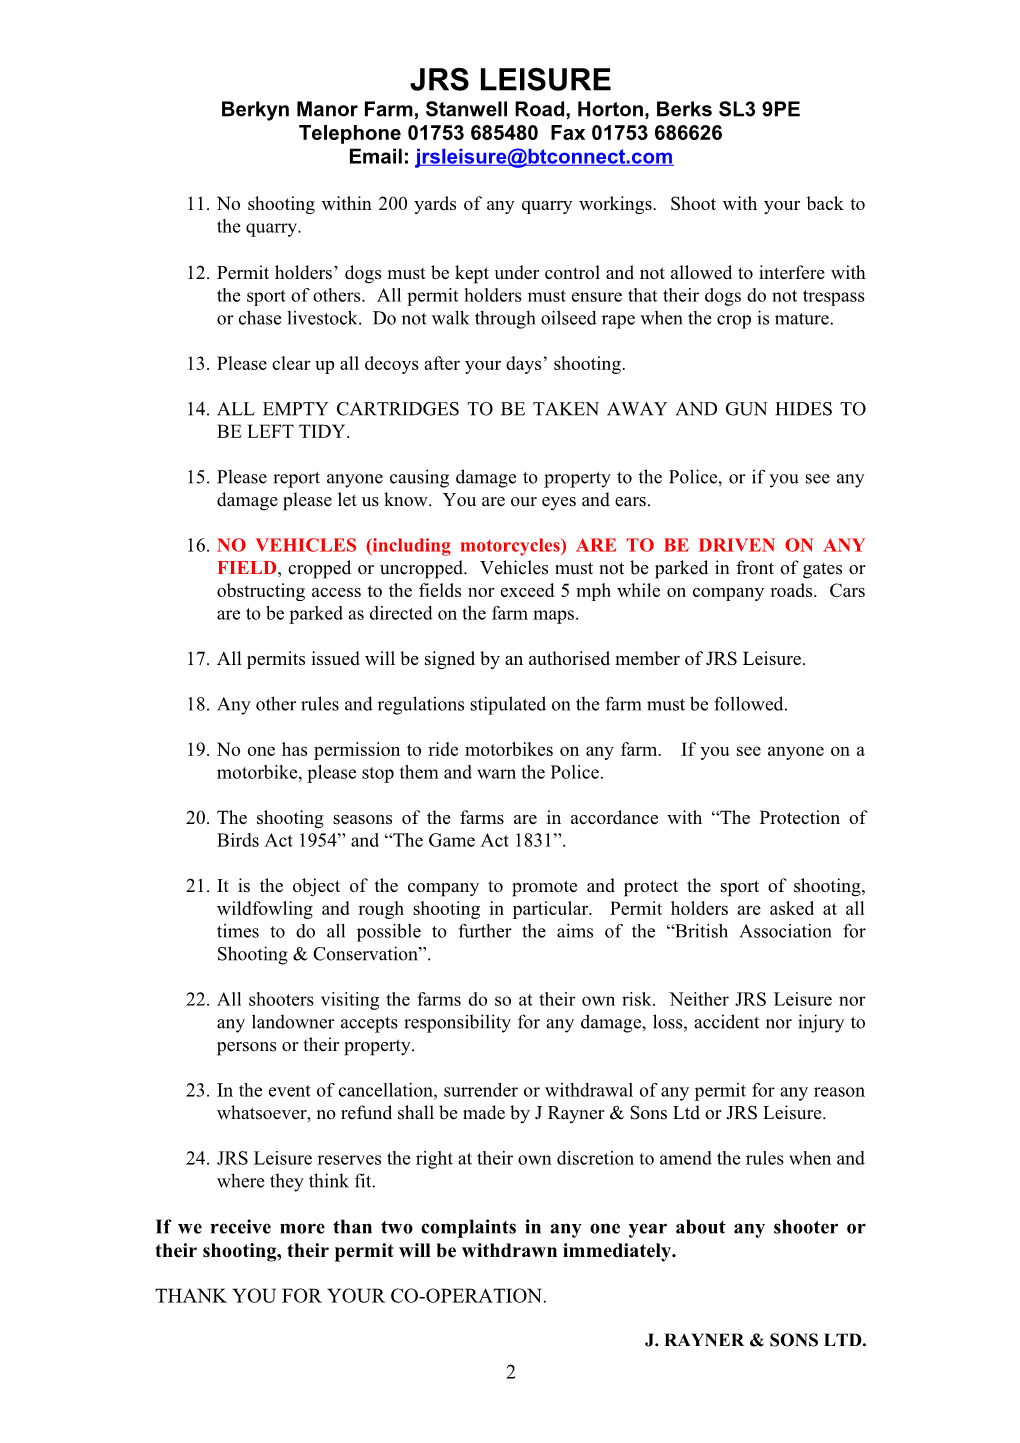 Rules and Regulations 2008